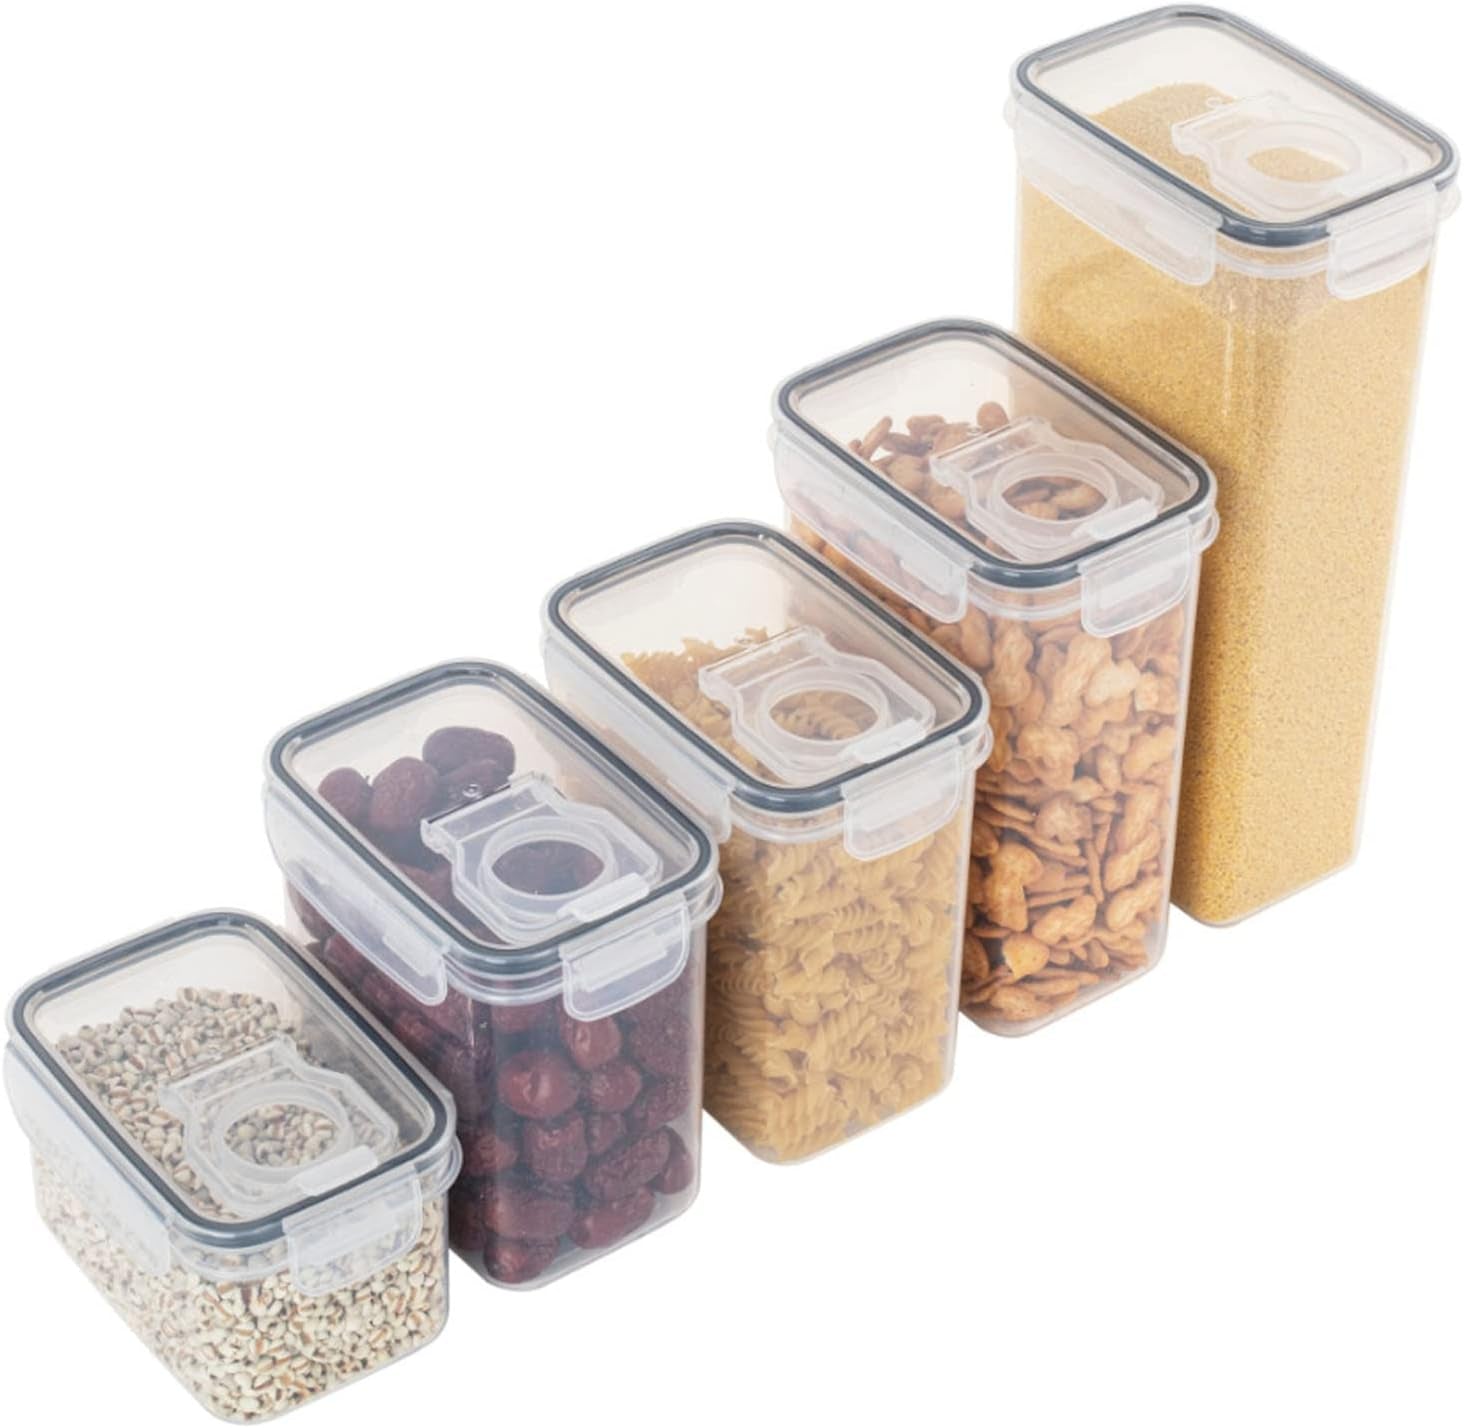 Food Storage Containers, 5 Size Single Airtight Clear Storage Containers, Vacuum Damp Proof Fresh-Keeping Storage Containers with Lids, Kitchen Pantry Stackable Storage Organizer #G  Generic 5.9*3.3*6.5In  